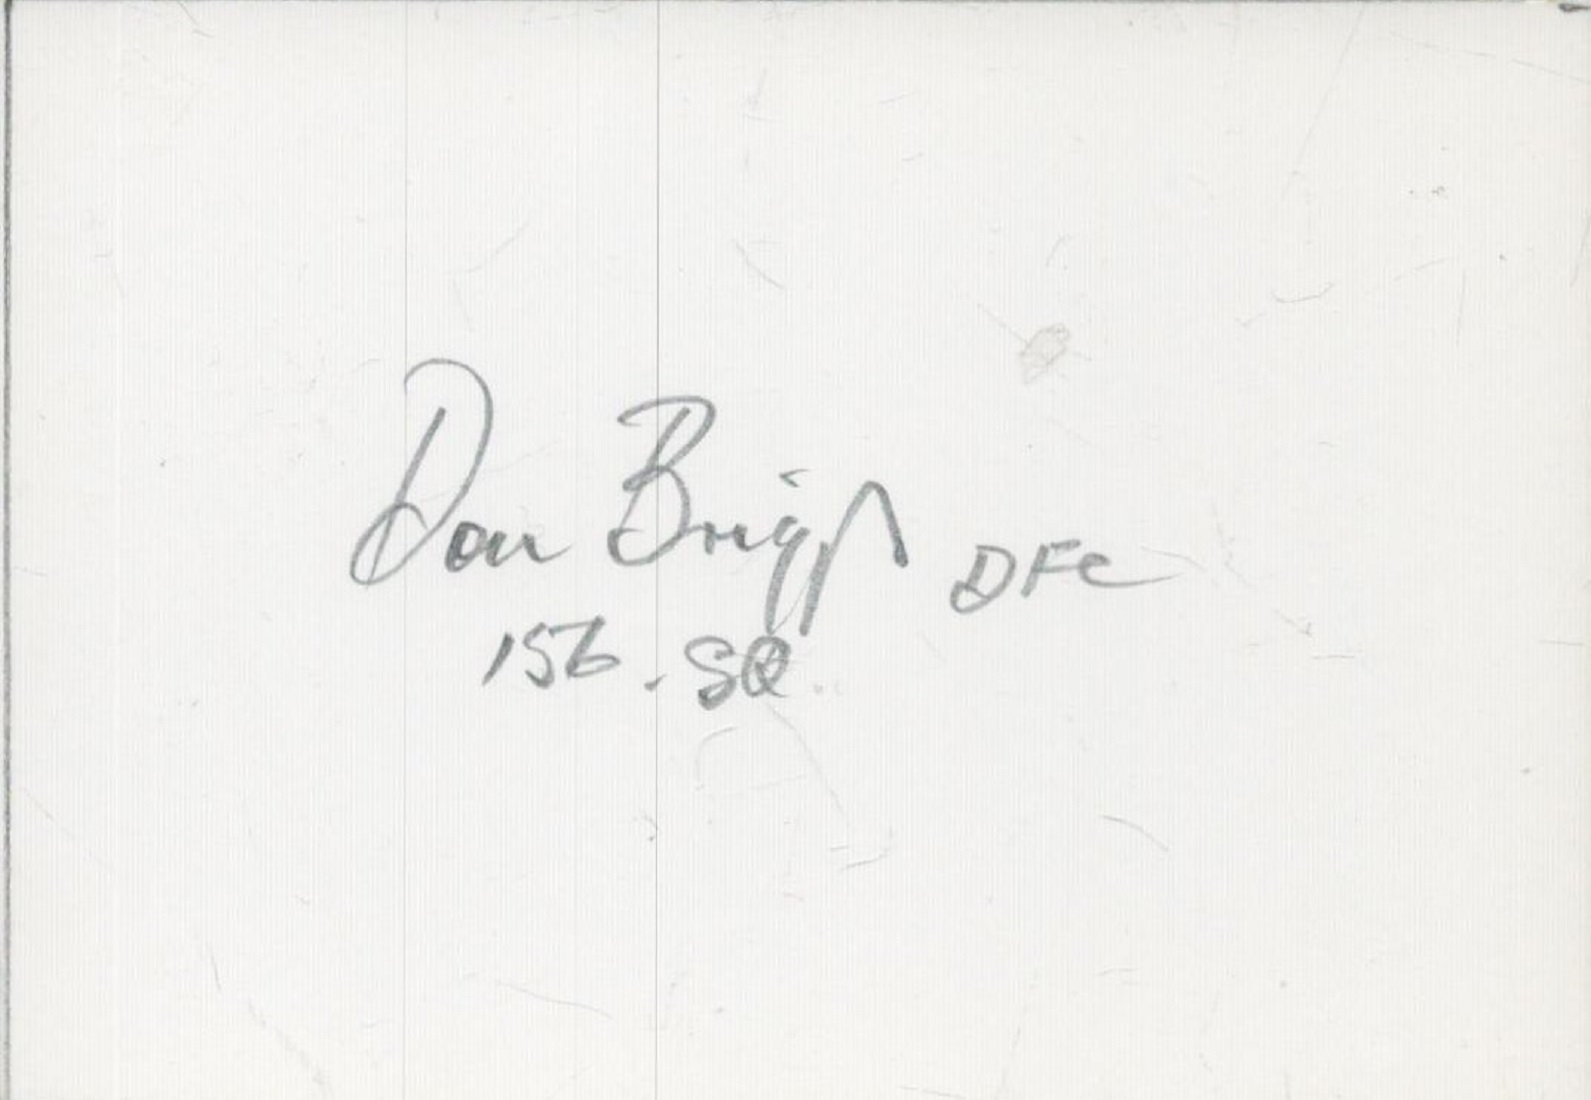 WW2 Don Briggs DFC signed white card. Posted as fitter engine to RAF Wittering working on Wellington